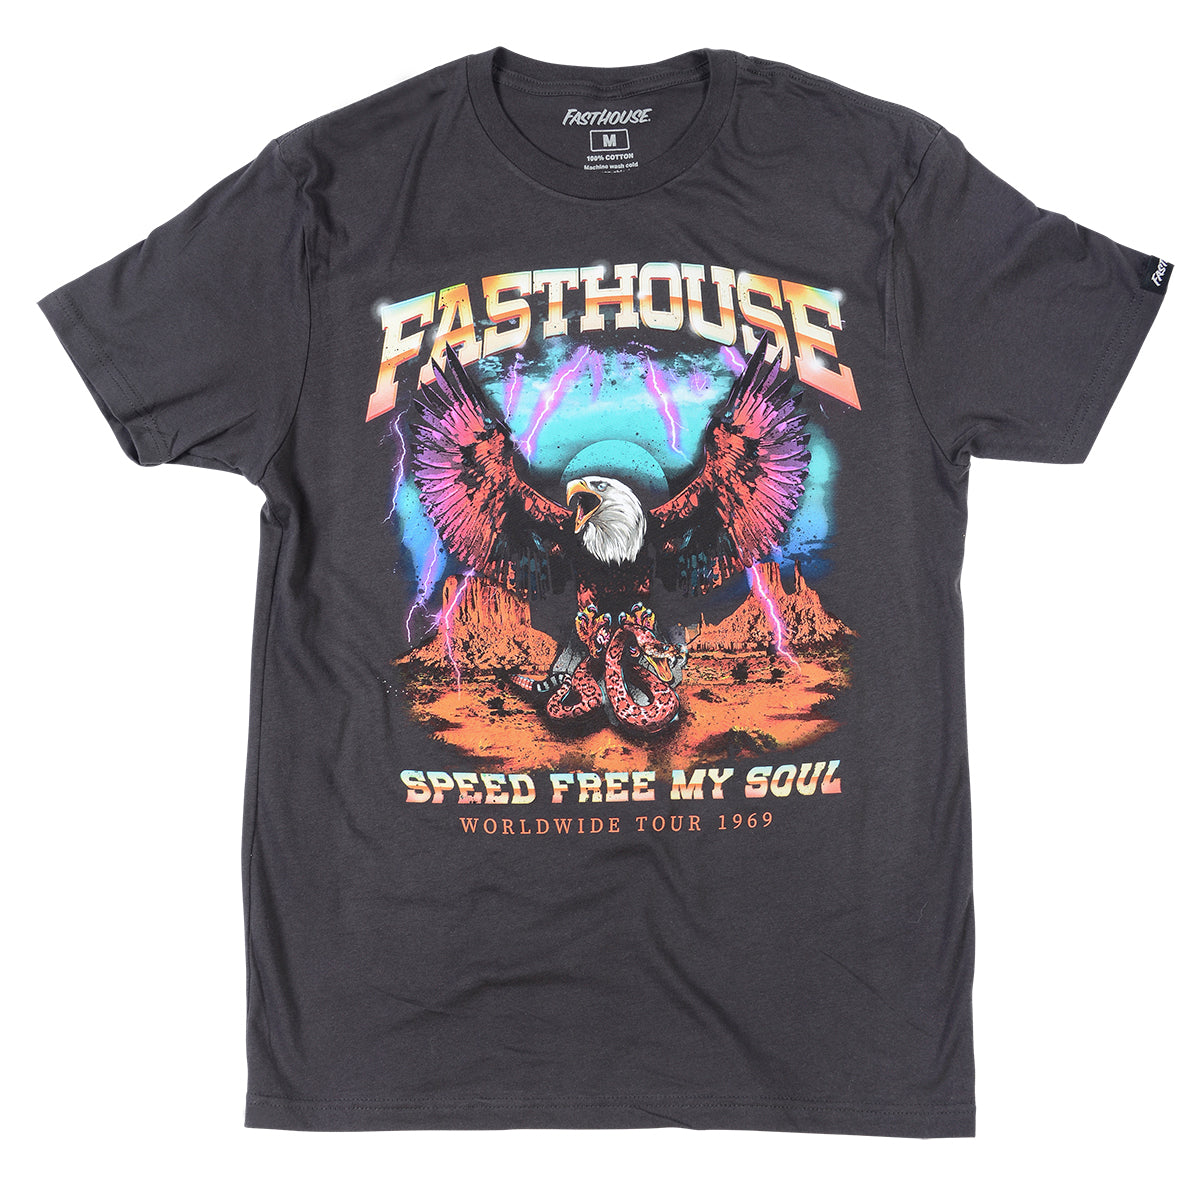 Tour 1969 Tee - Washed Black – Fasthouse